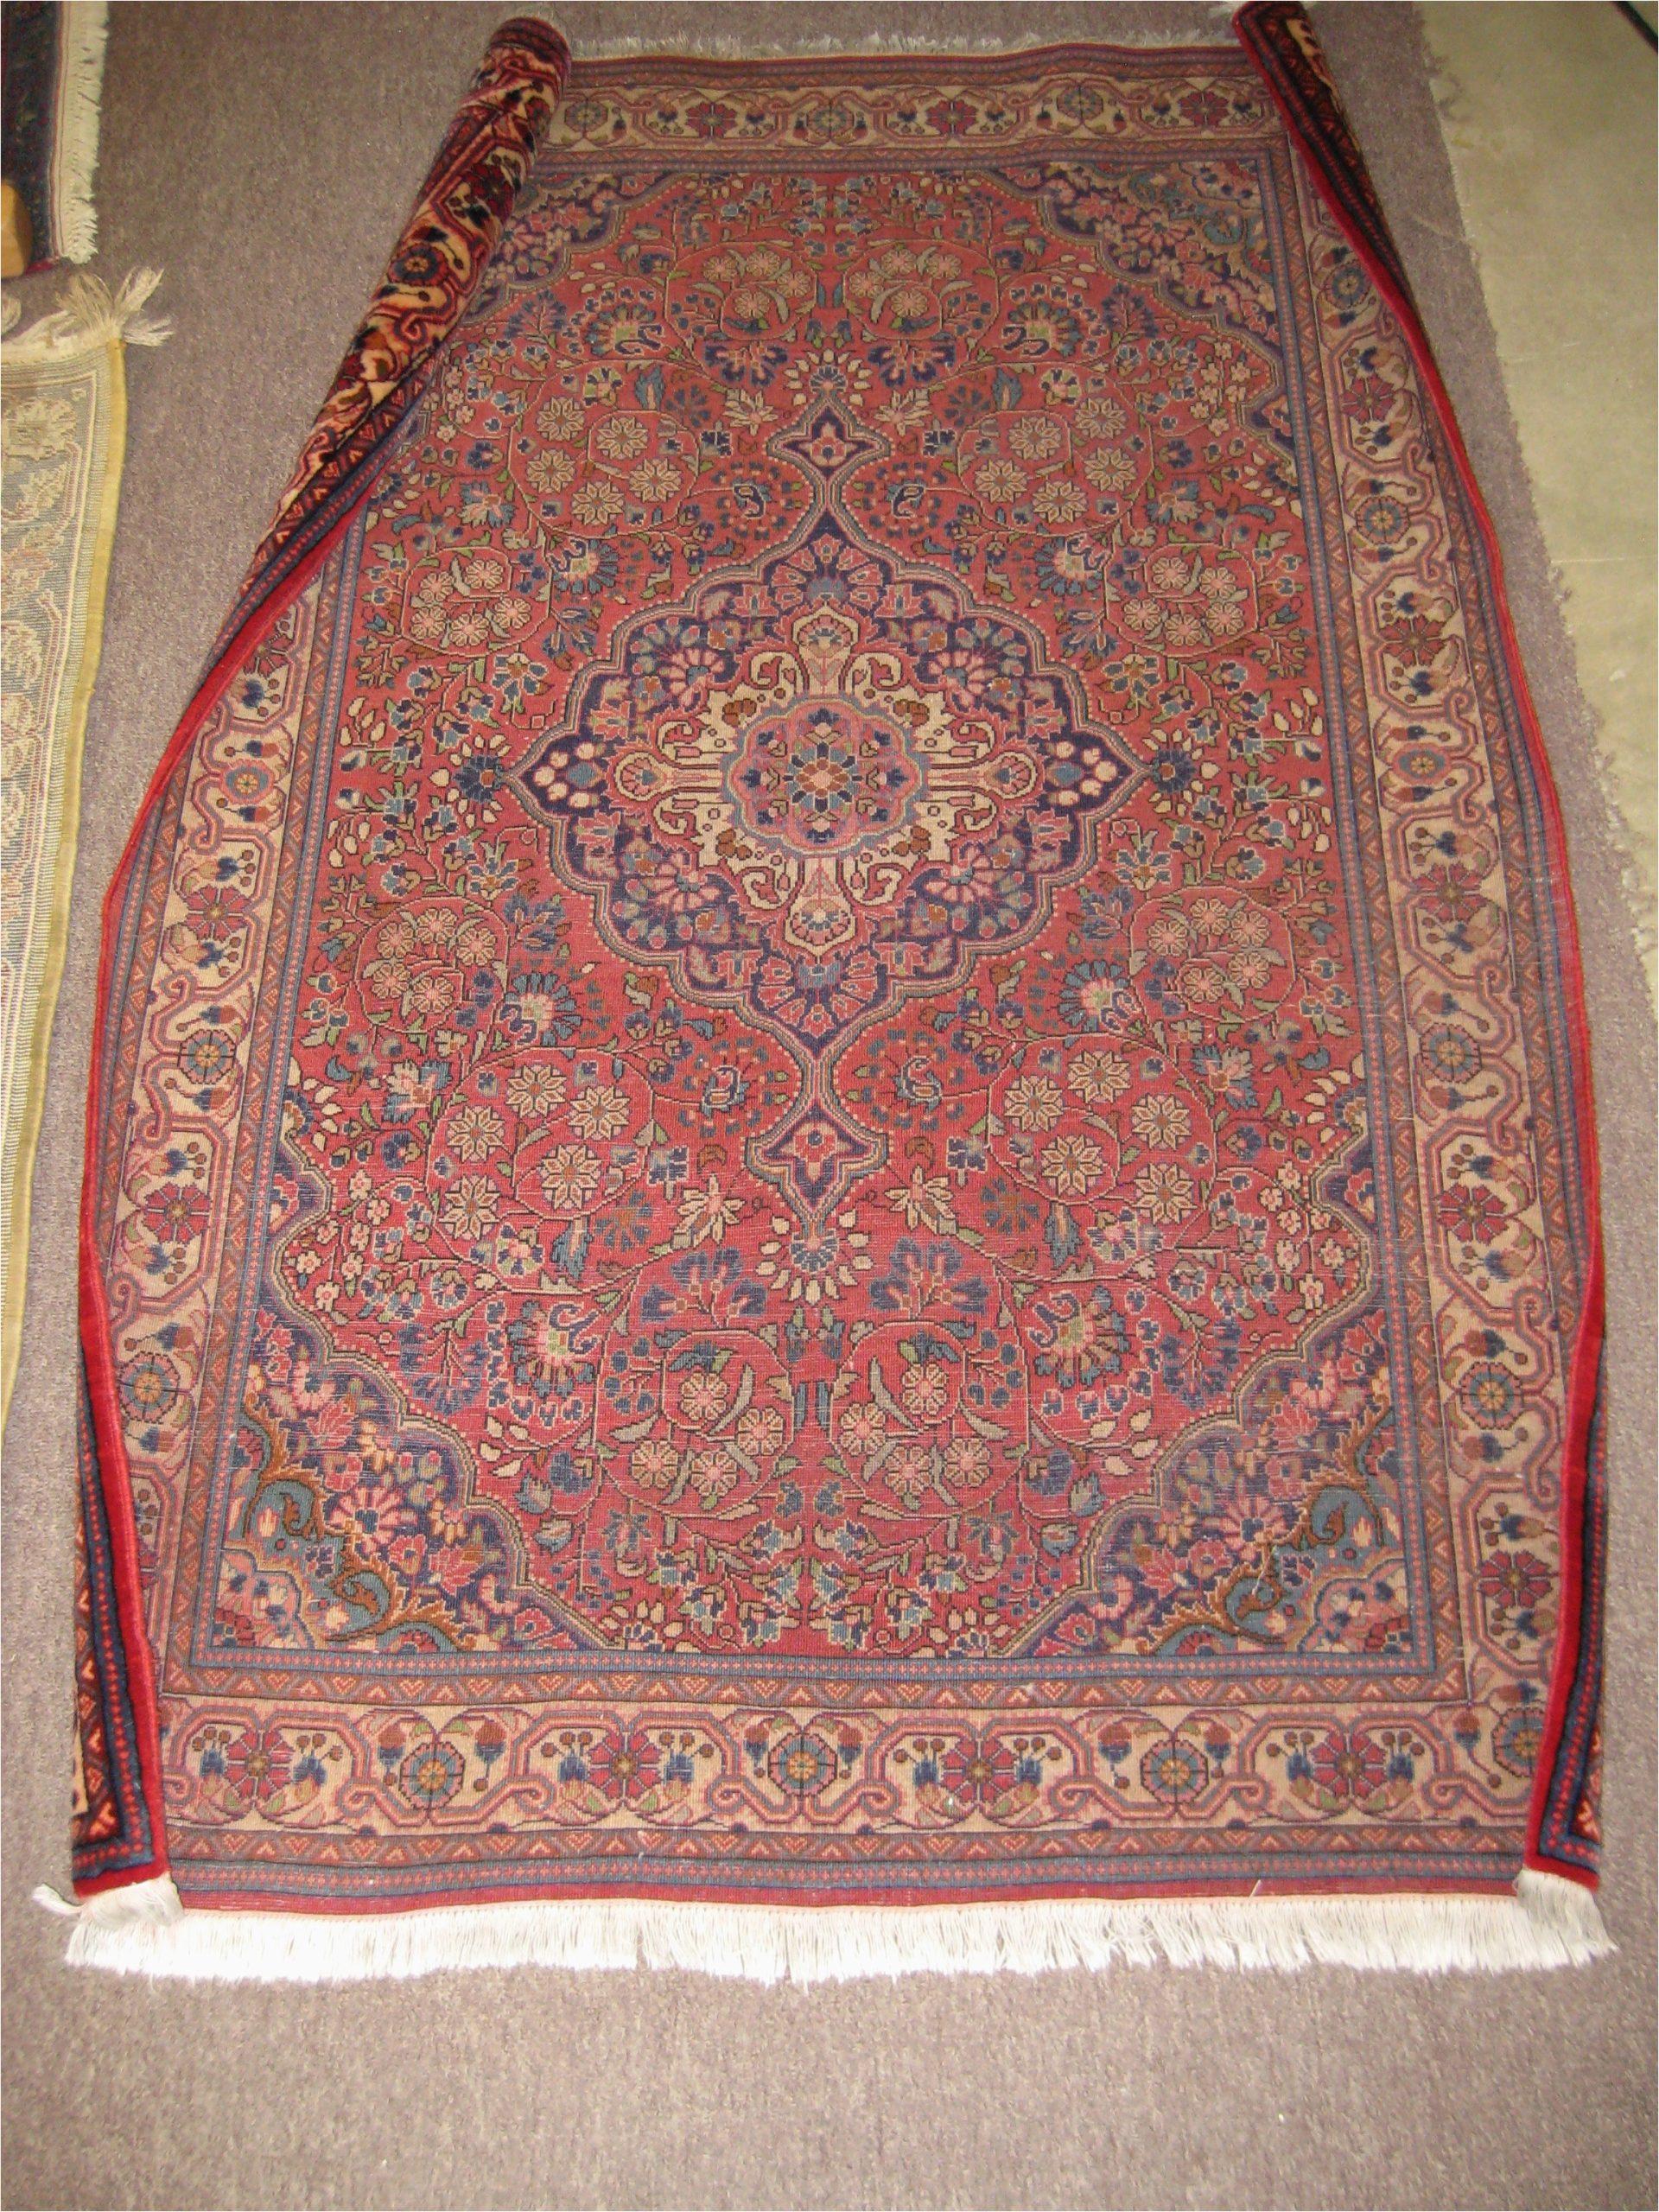 Area Rug Buckled after Cleaning Rug Wrinkles – Cleanfax